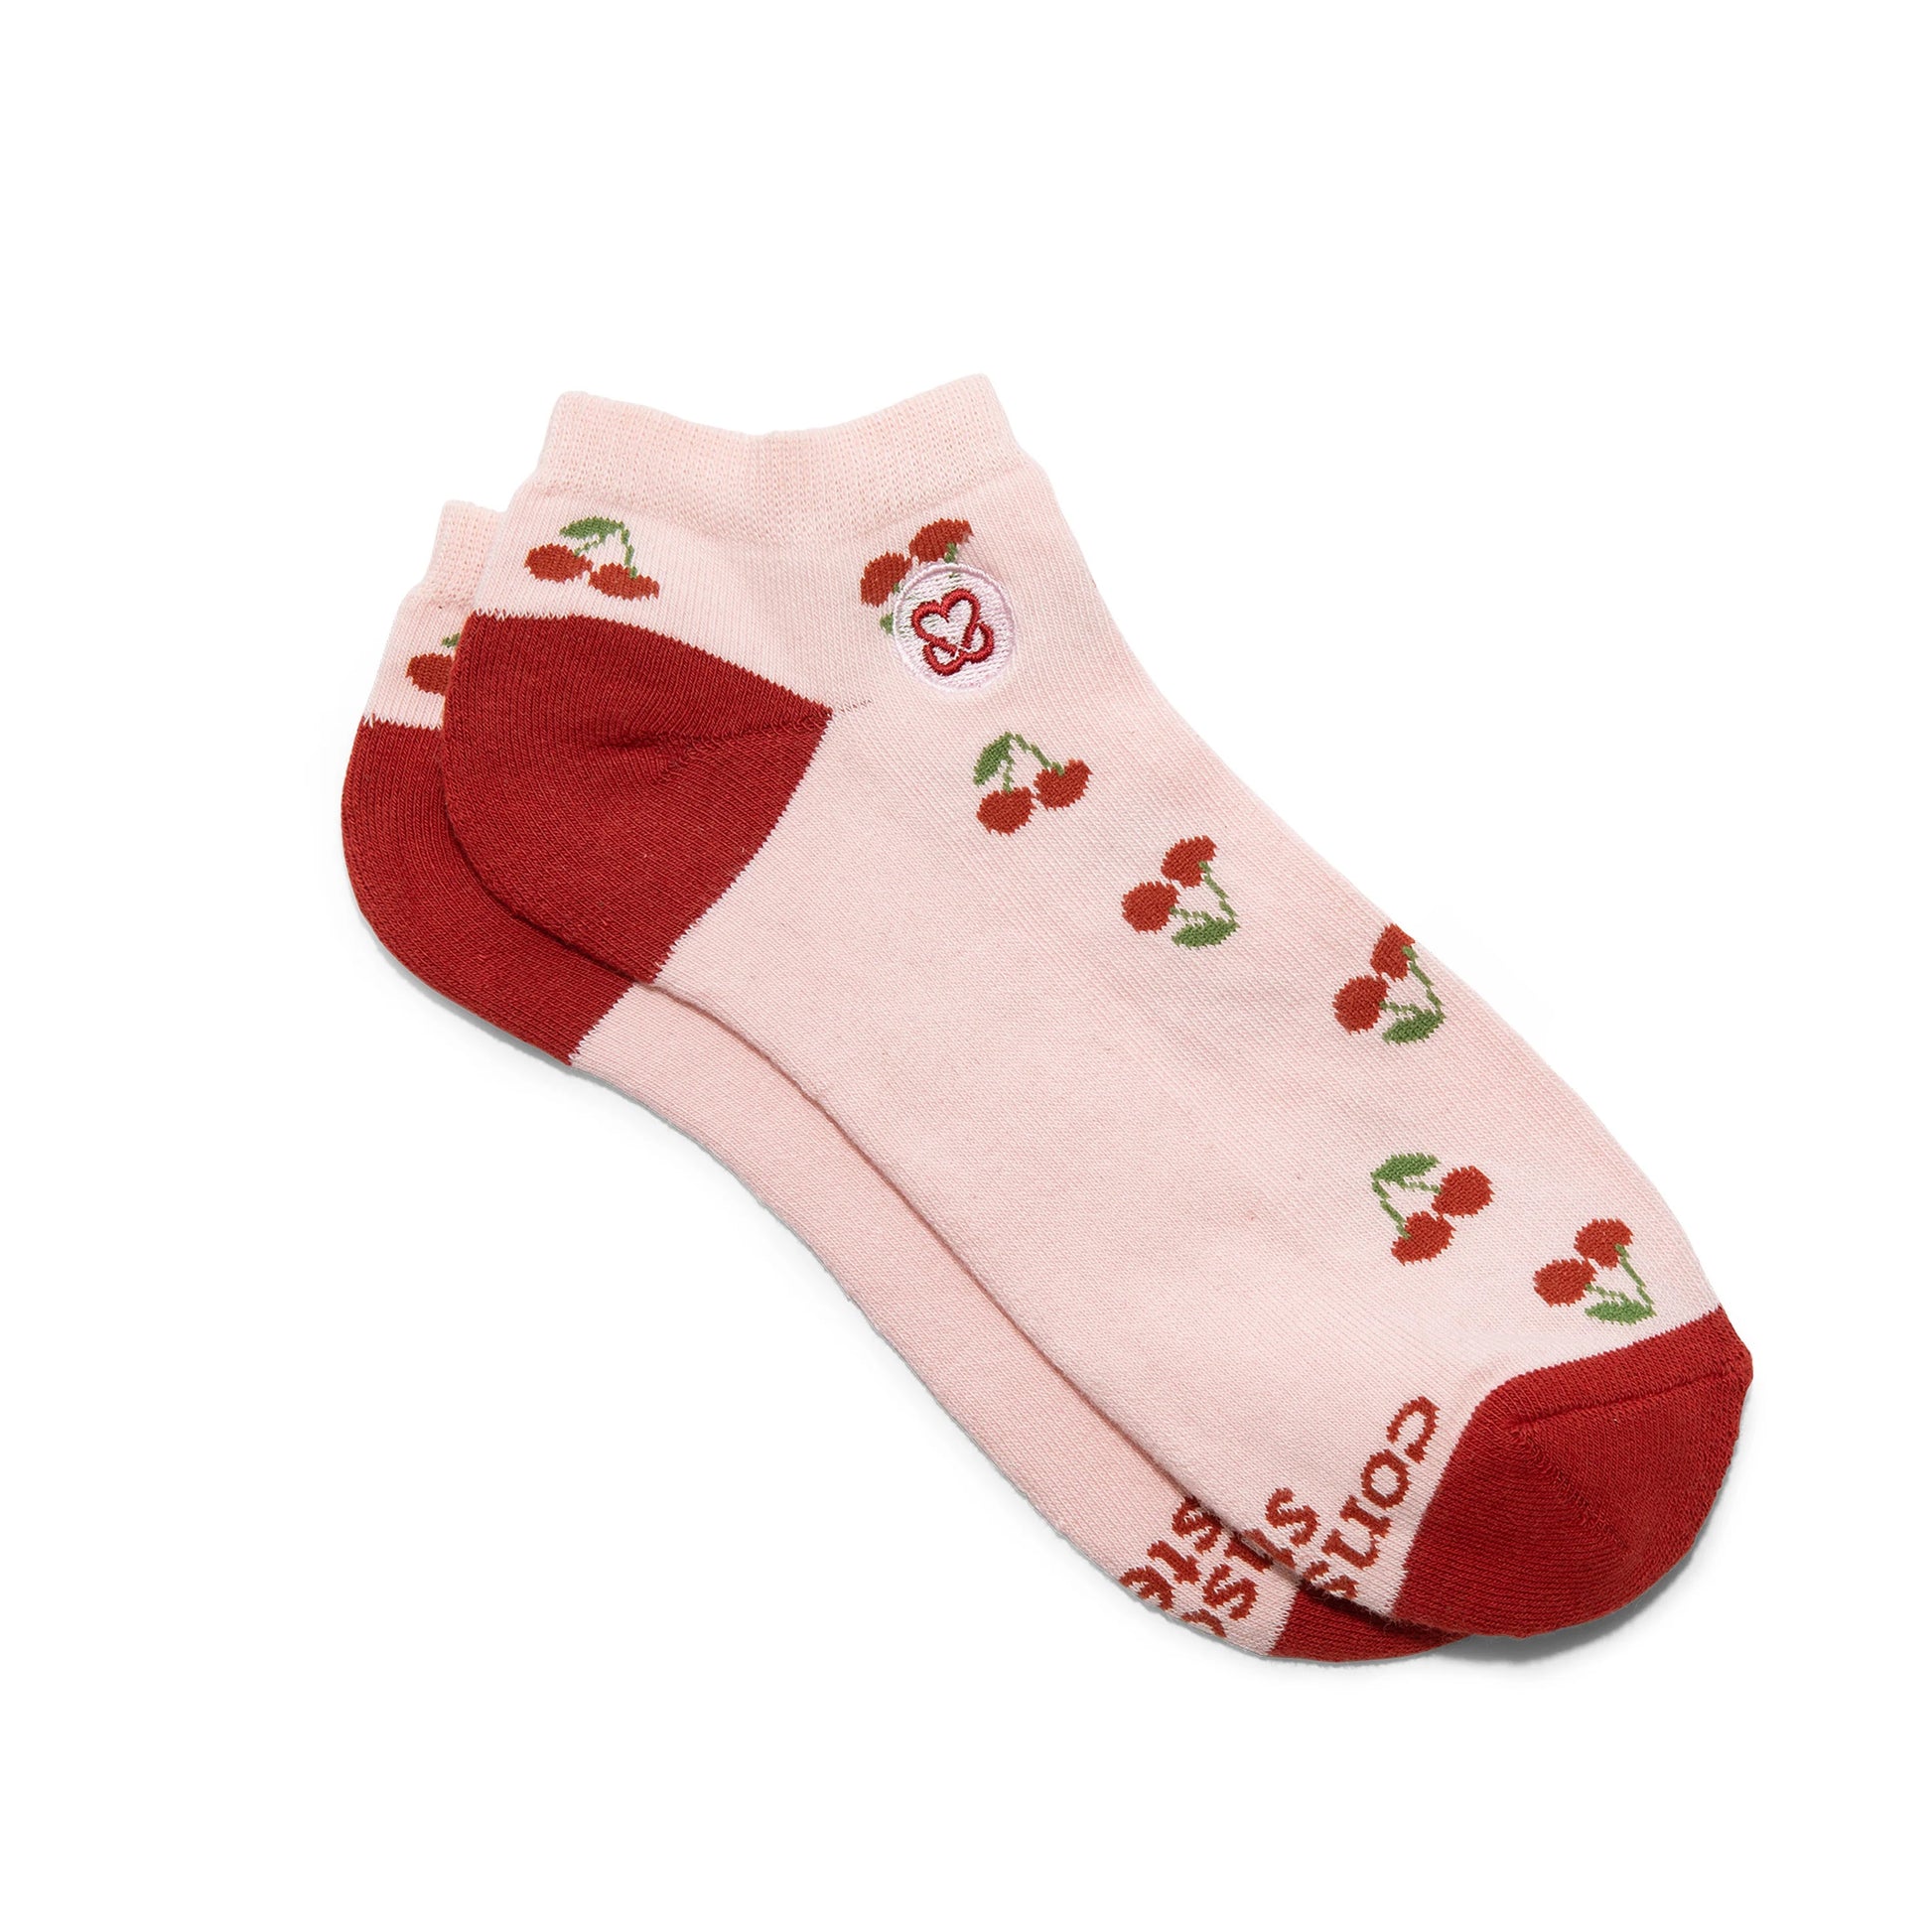 Conscious Step, Ankle Socks That Support Self-Checks - Cherries - Boutique Dandelion